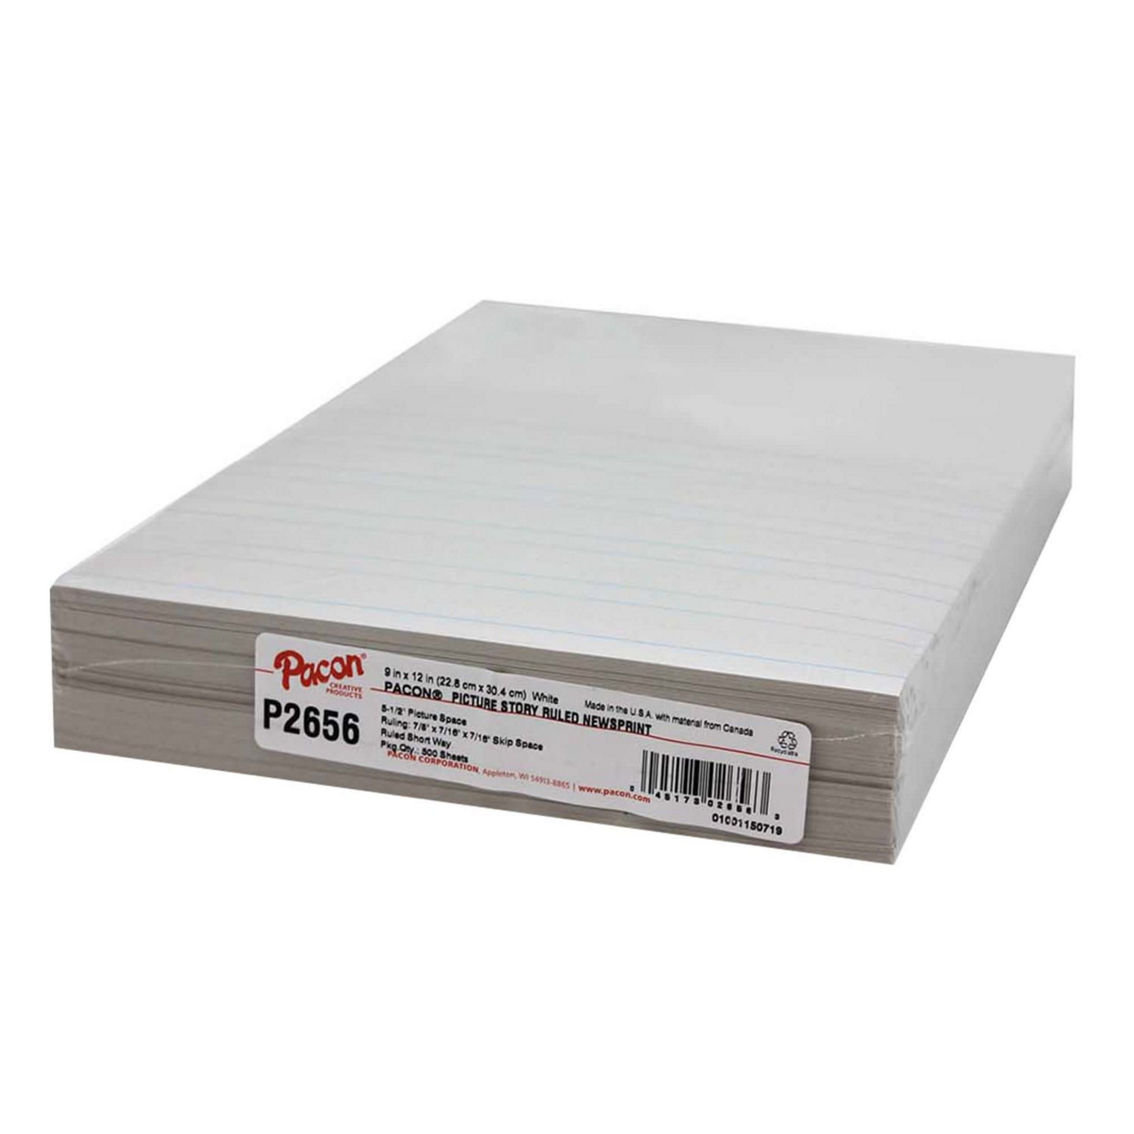 Pacon® Newsprint Handwriting Paper, Picture Story, 500 Sheets Per Pack, 3 Packs - Image 3 of 3